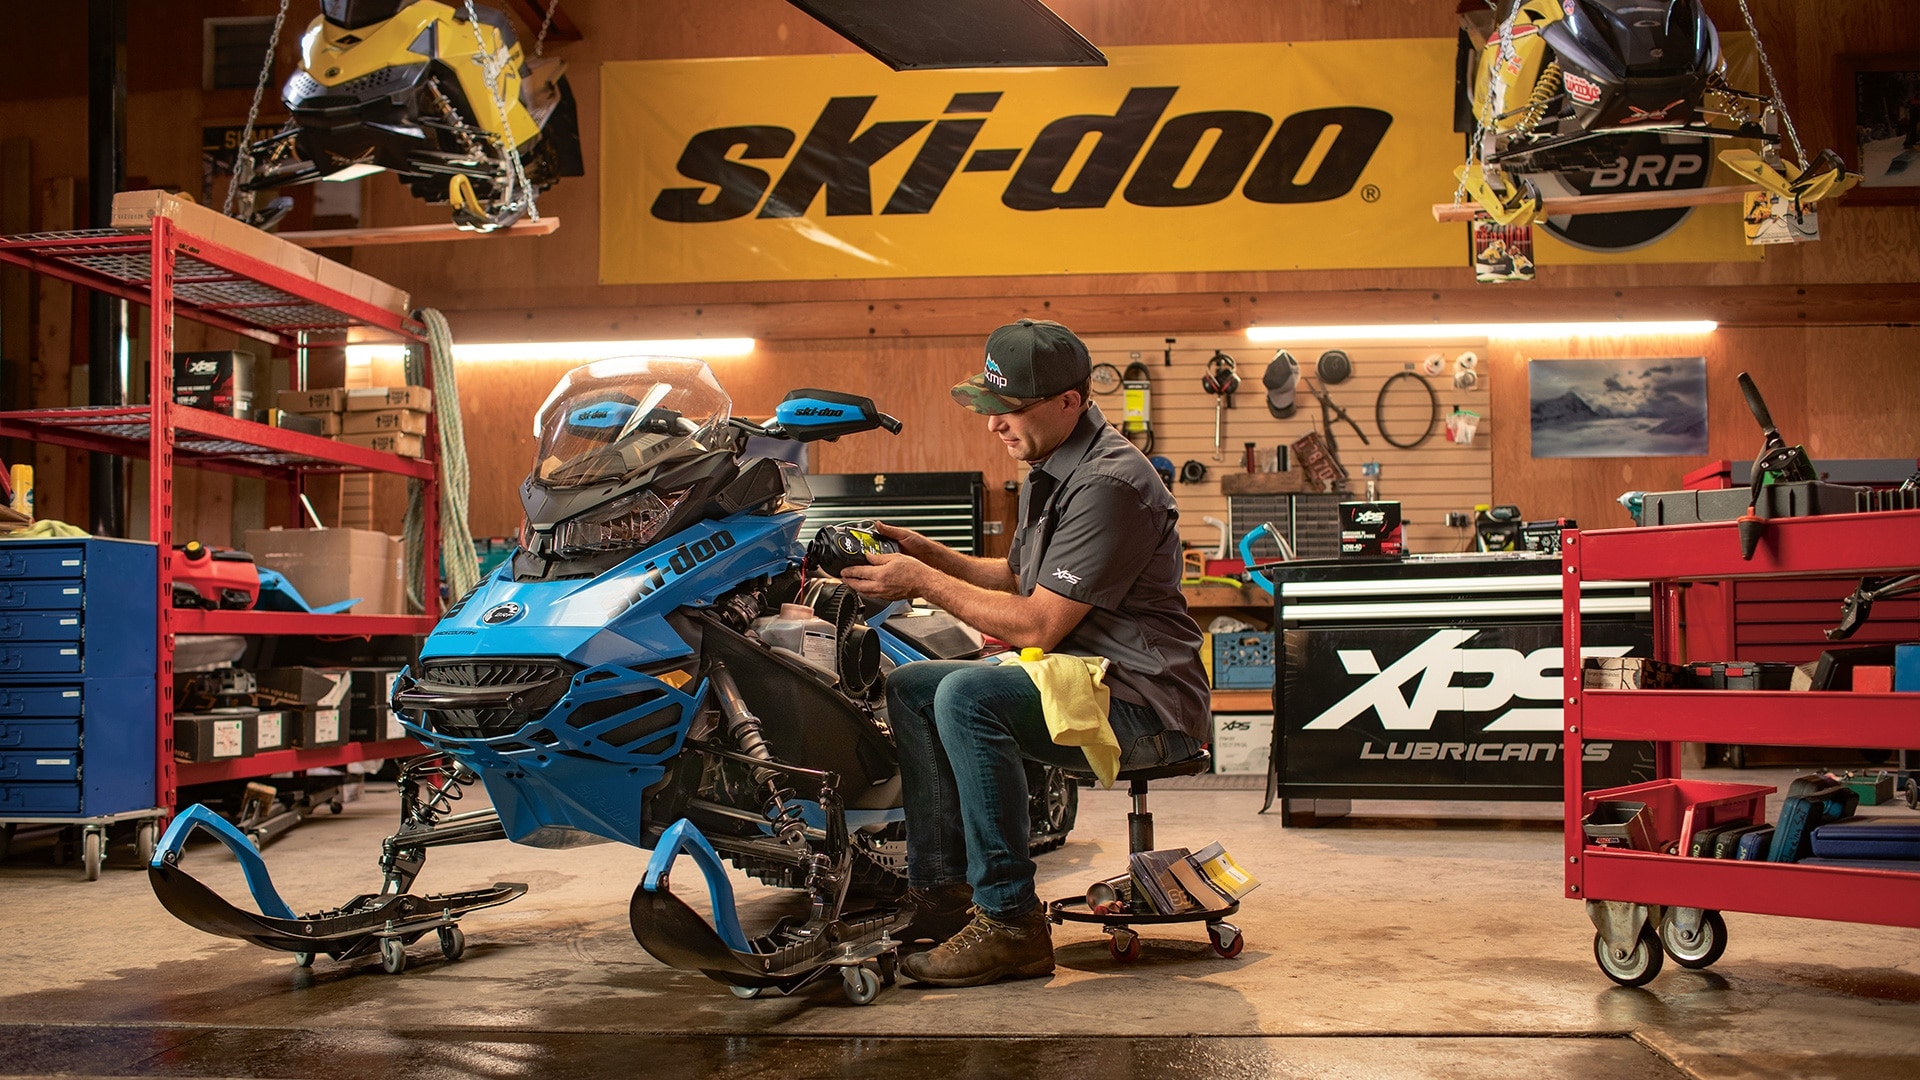 WHAT IS THE BEST WAY TO STORE A SKI-DOO FOR THE SUMMER?